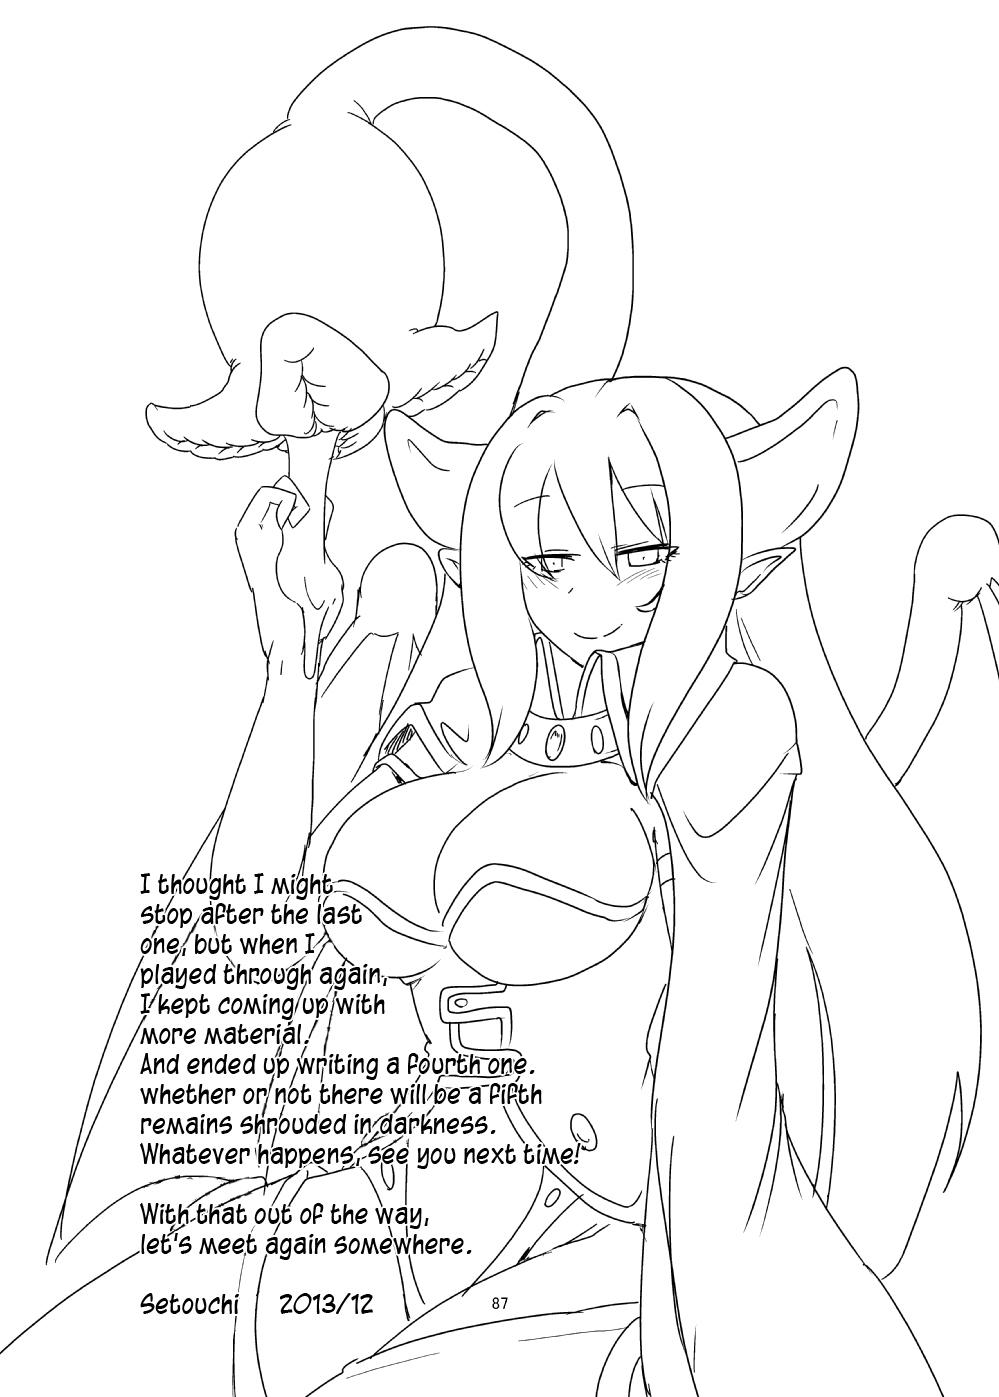 Hot Pussy Mon Musu Quest! Beyond The End 4 - Monster girl quest Menage - Page 80